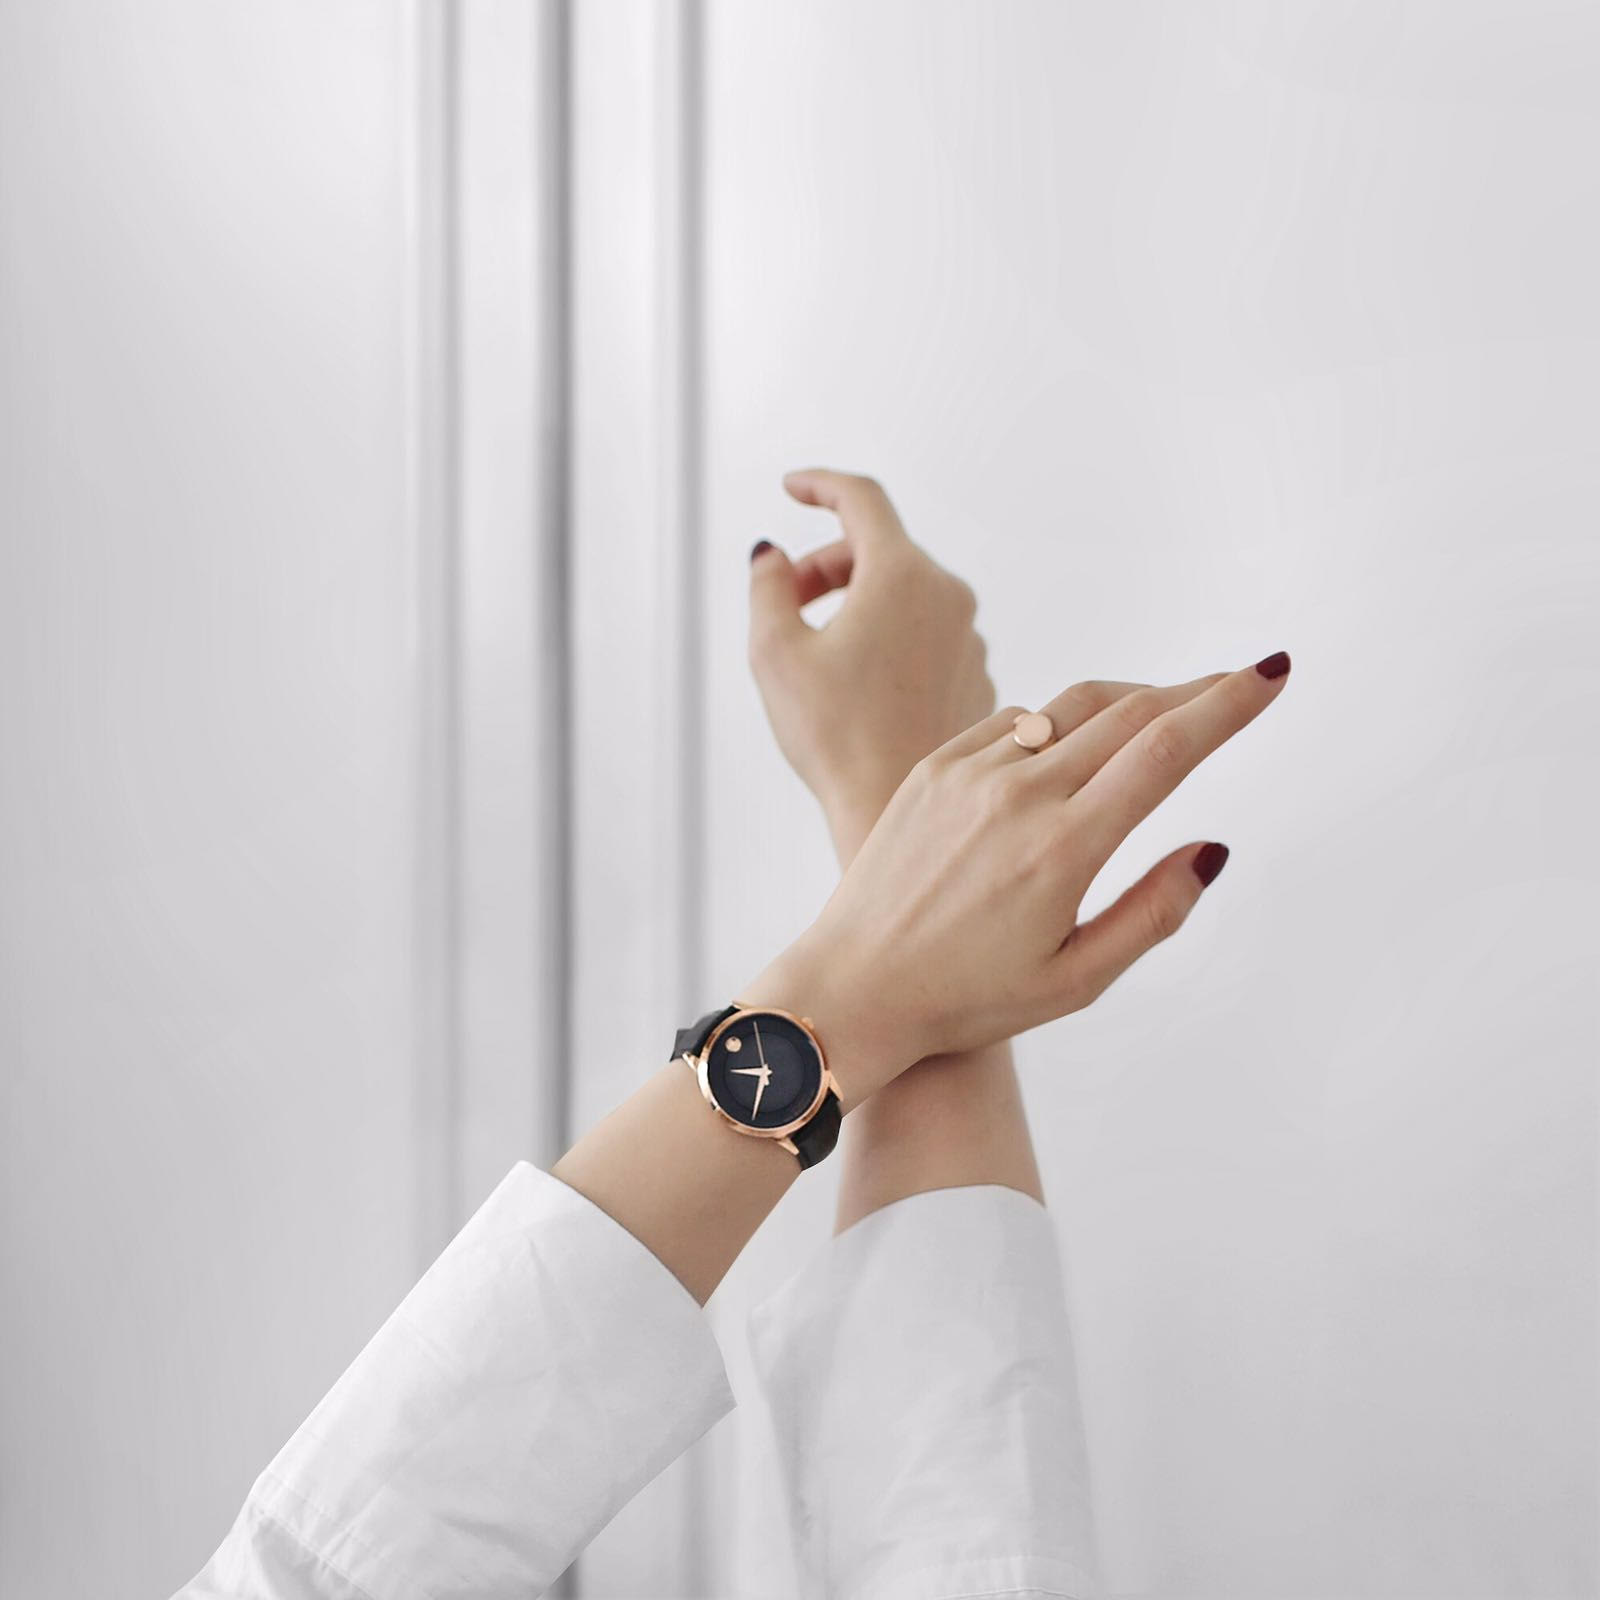 Movado celebrates the 70th anniversary of its iconic Museum Dial